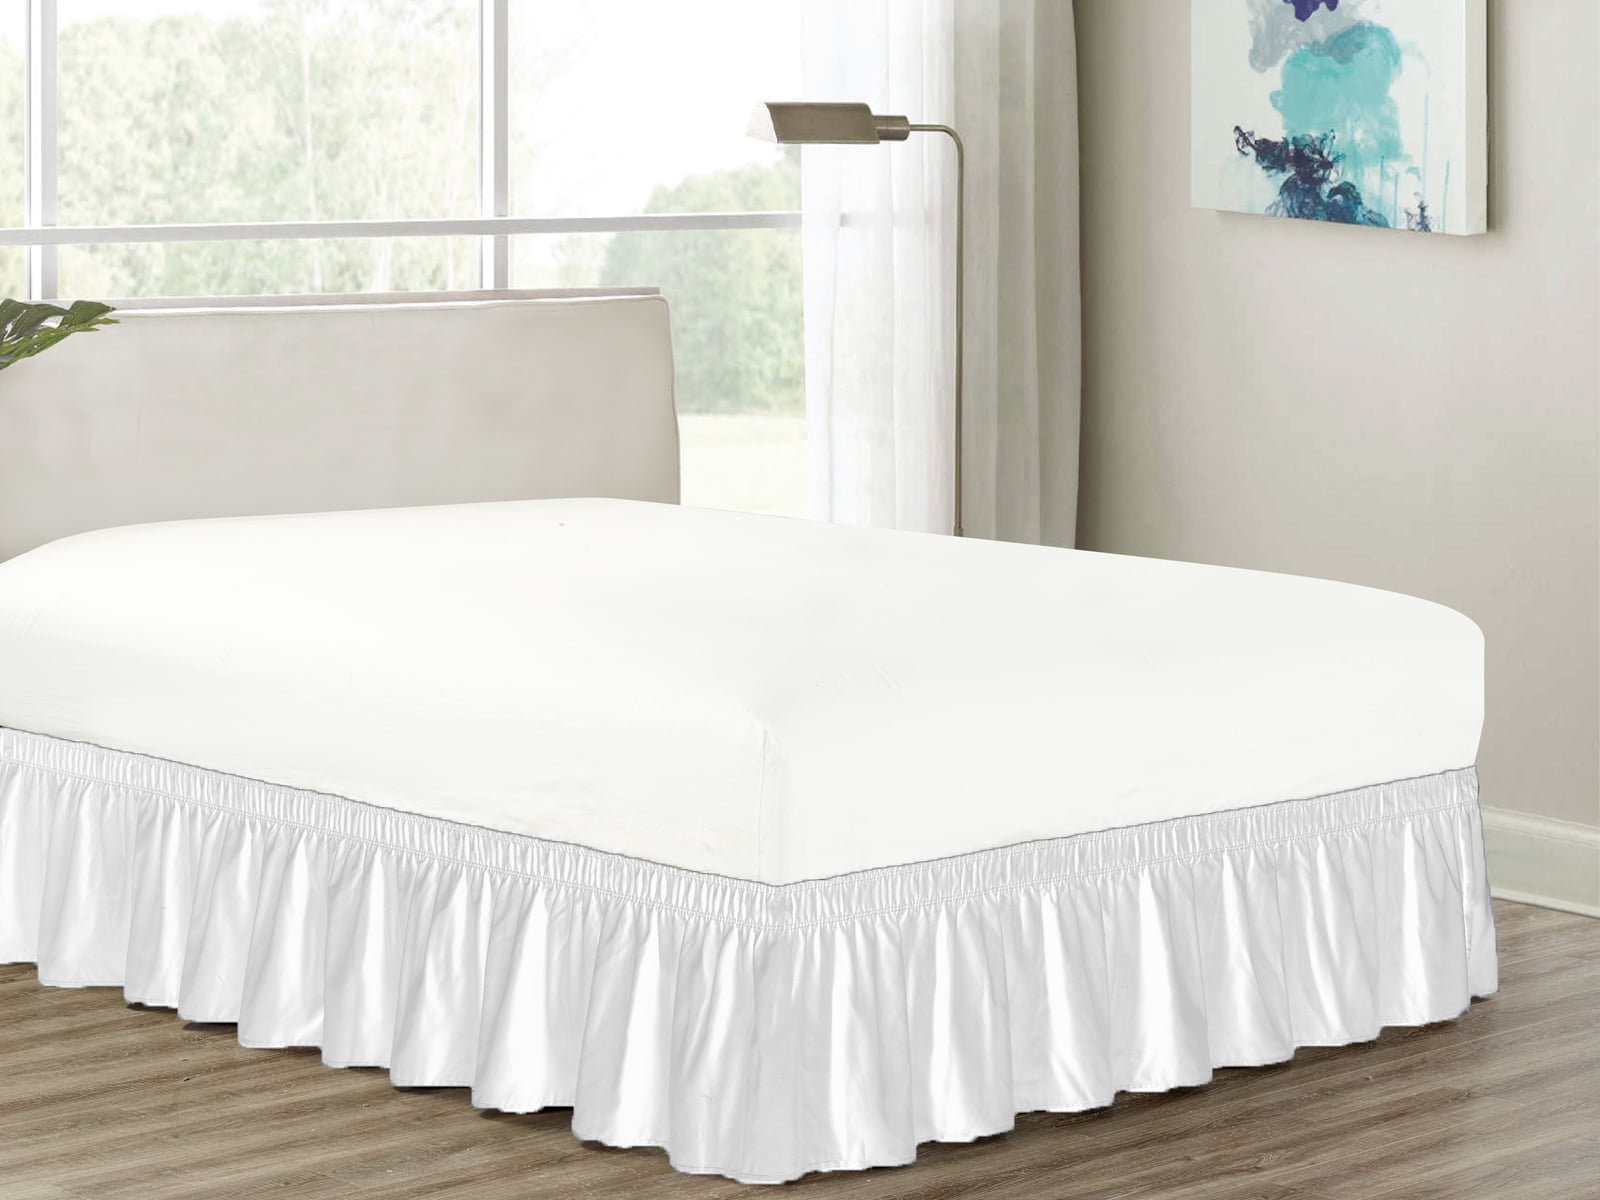 Details about   3 Sided Wrap Around Simple Tuck Dust Ruffled Bed Skirt Solid White 800 TC Cotton 